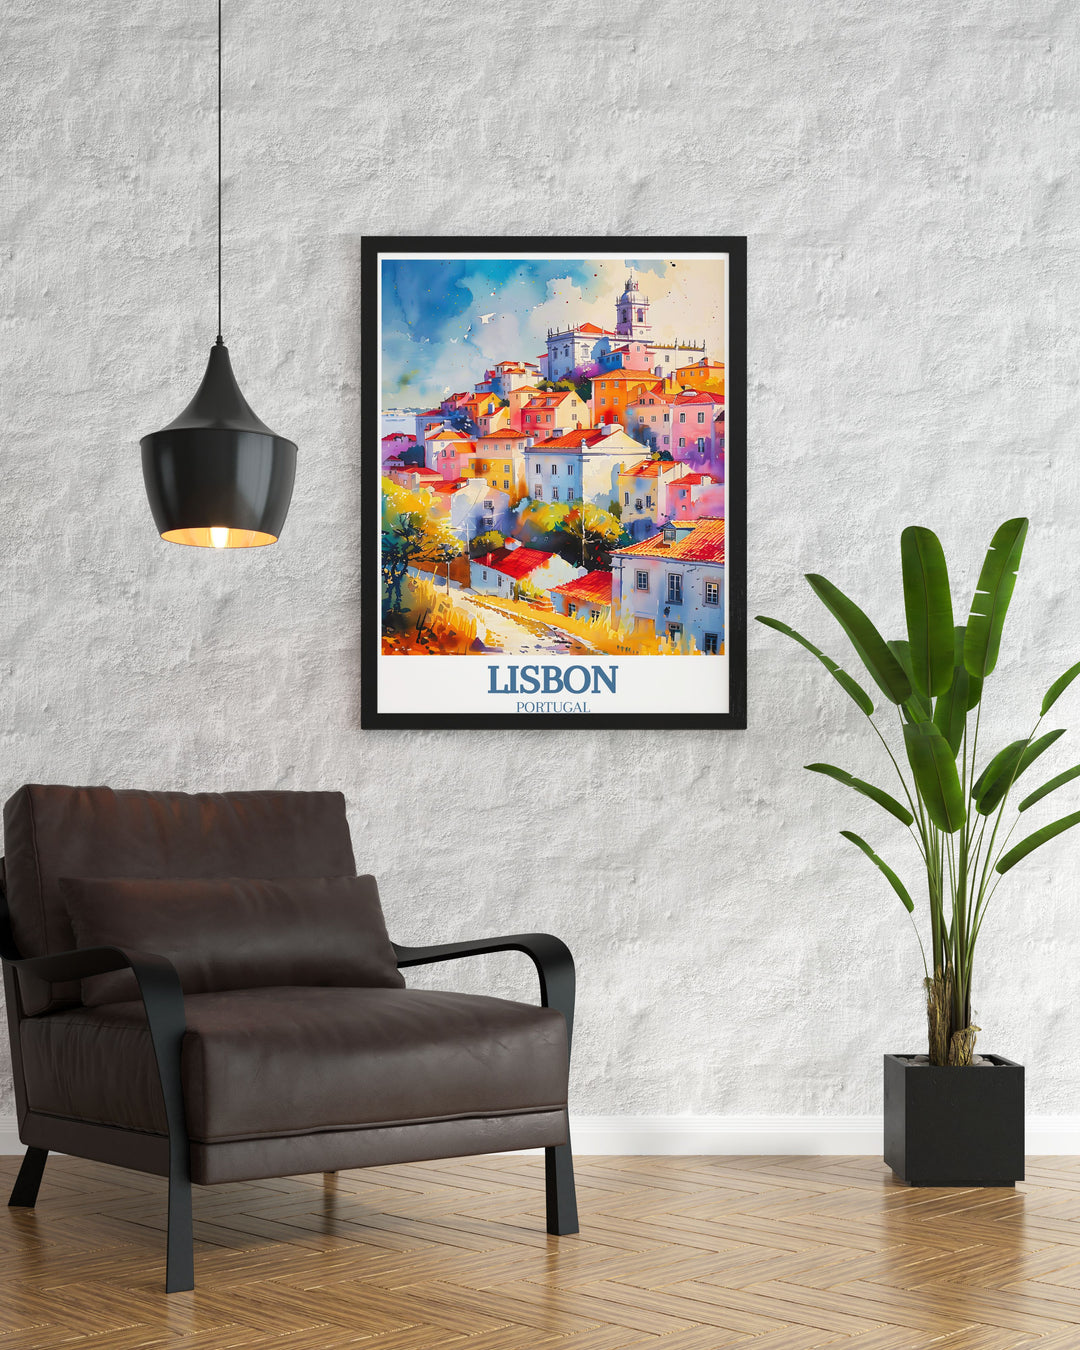 The Portugal Wall Art collection includes a stunning Framed Print of Alfama District Miradouro das Portas do Sol perfect for creating an elegant and inviting living space with its beautiful portrayal of Lisbons scenic views